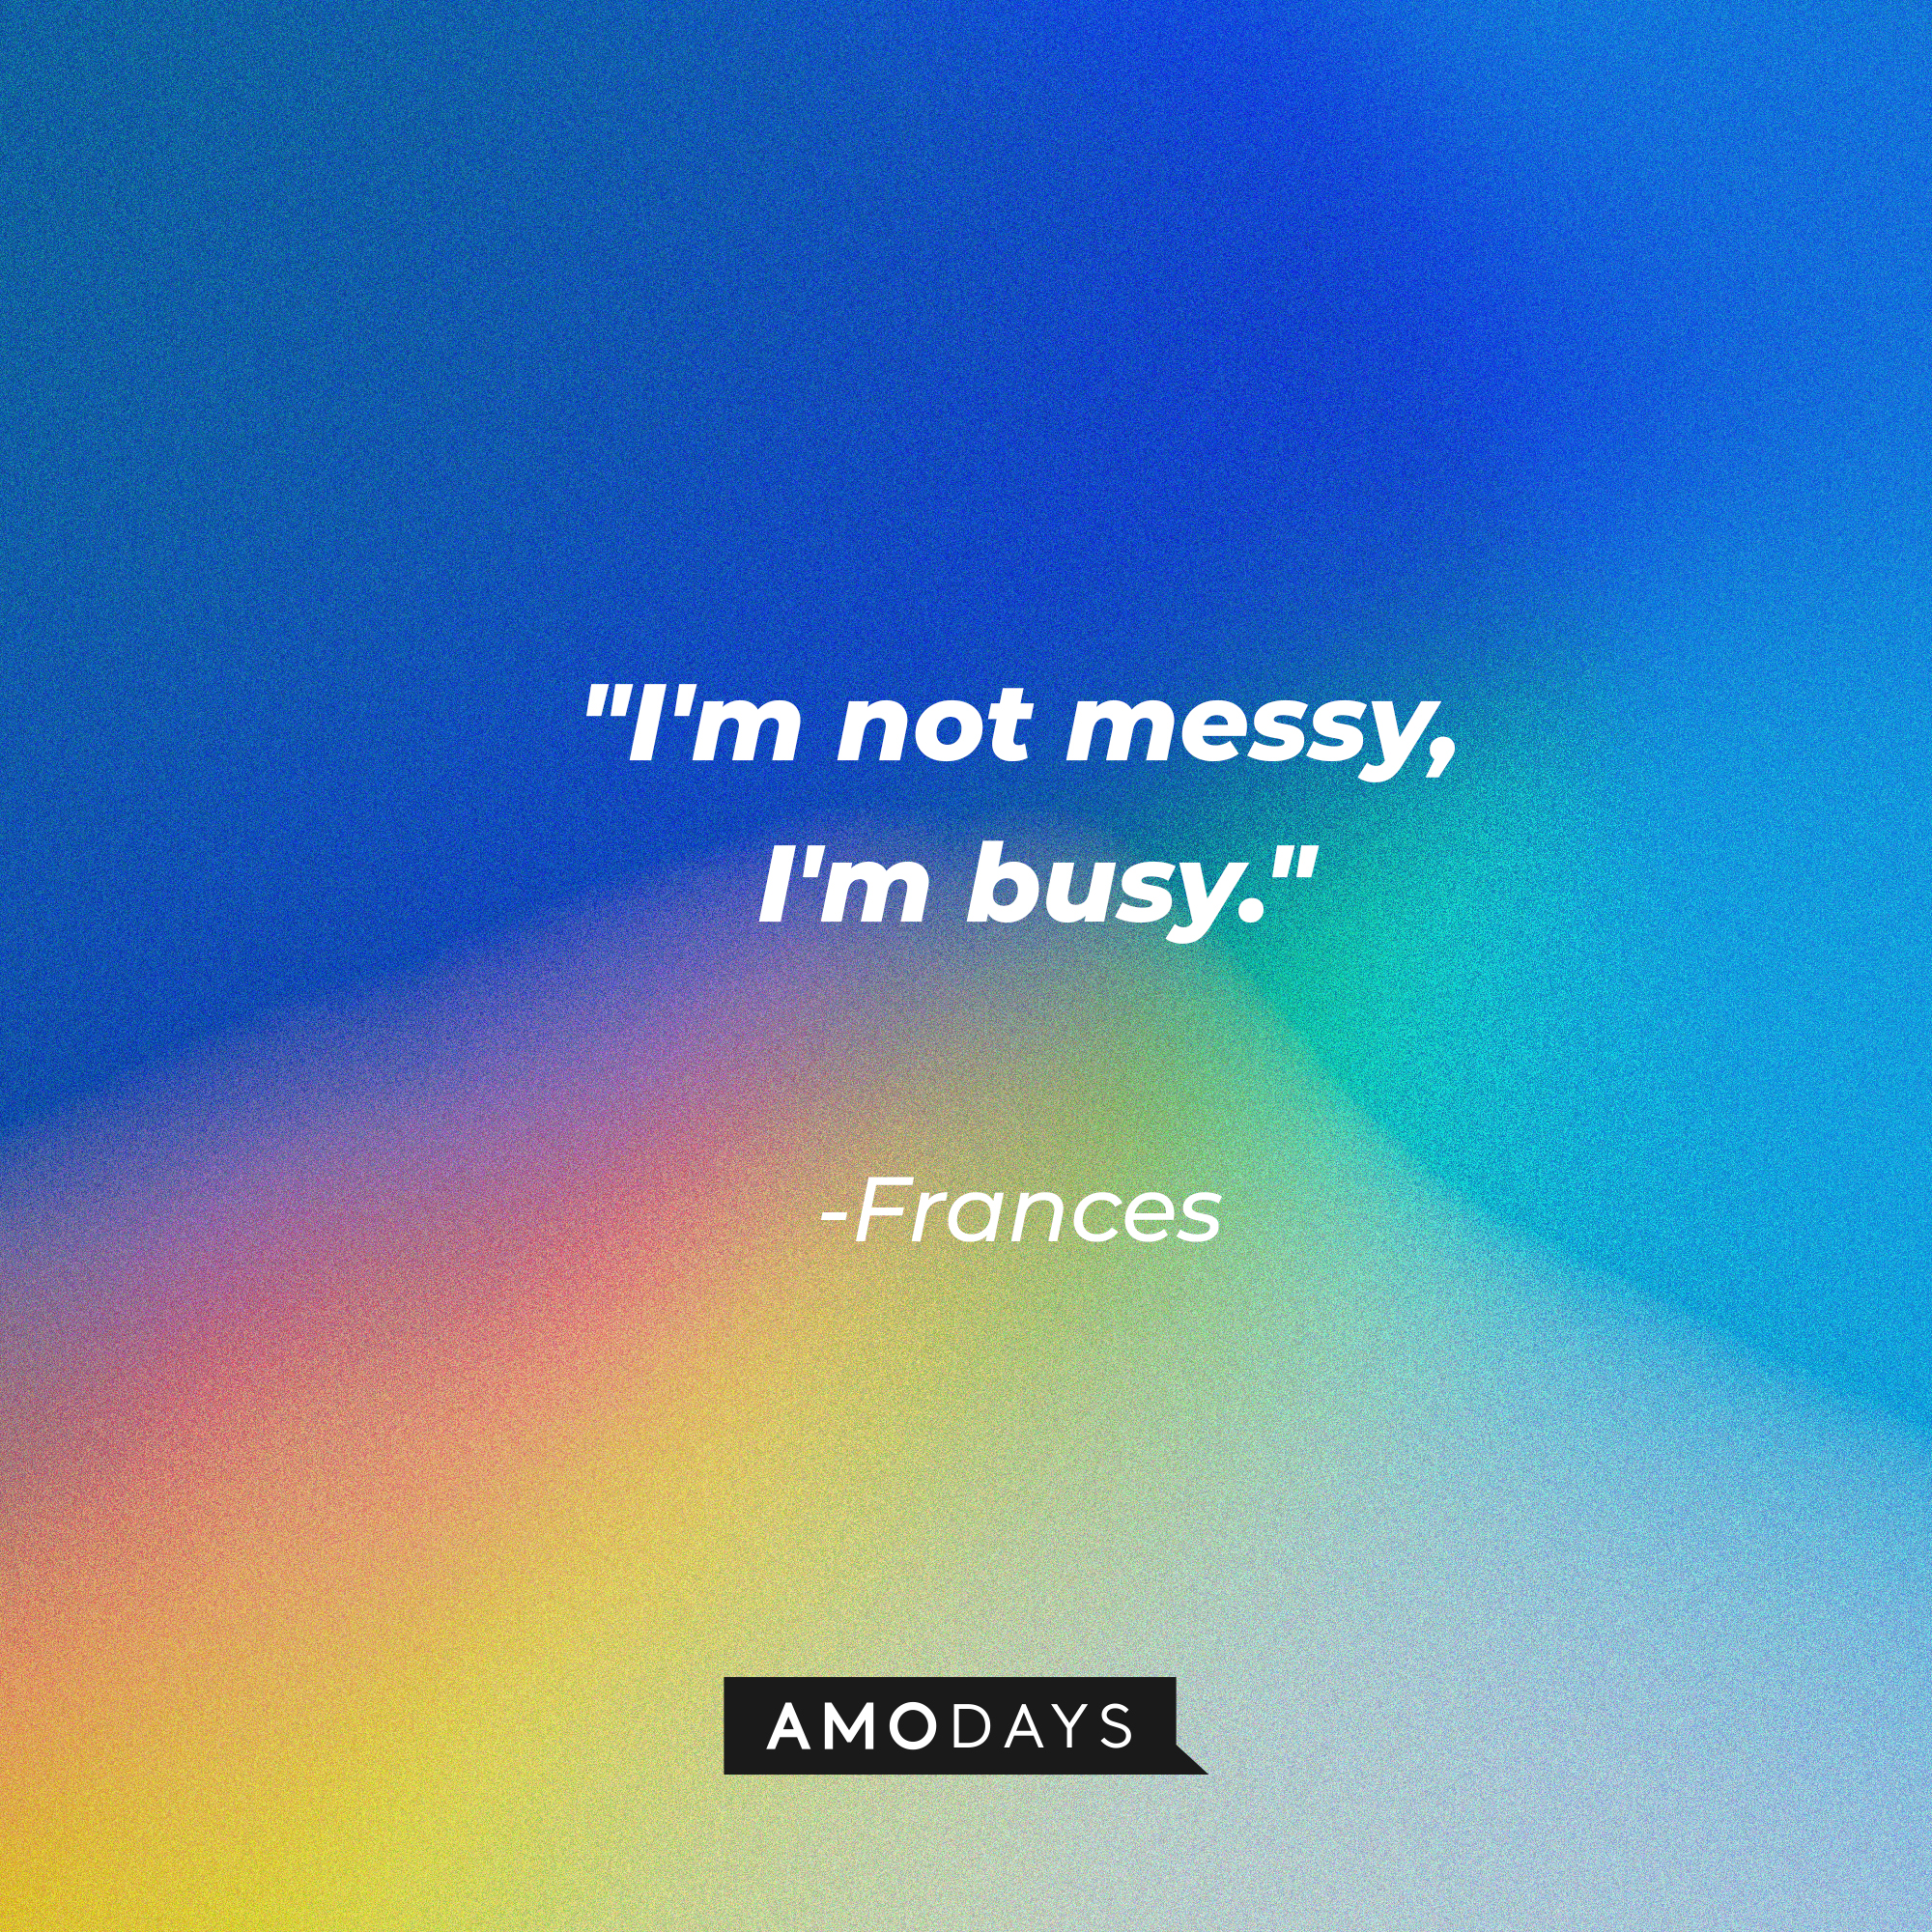 Frances' quote: "I'm not messy, I'm busy." | Source: AmoDays